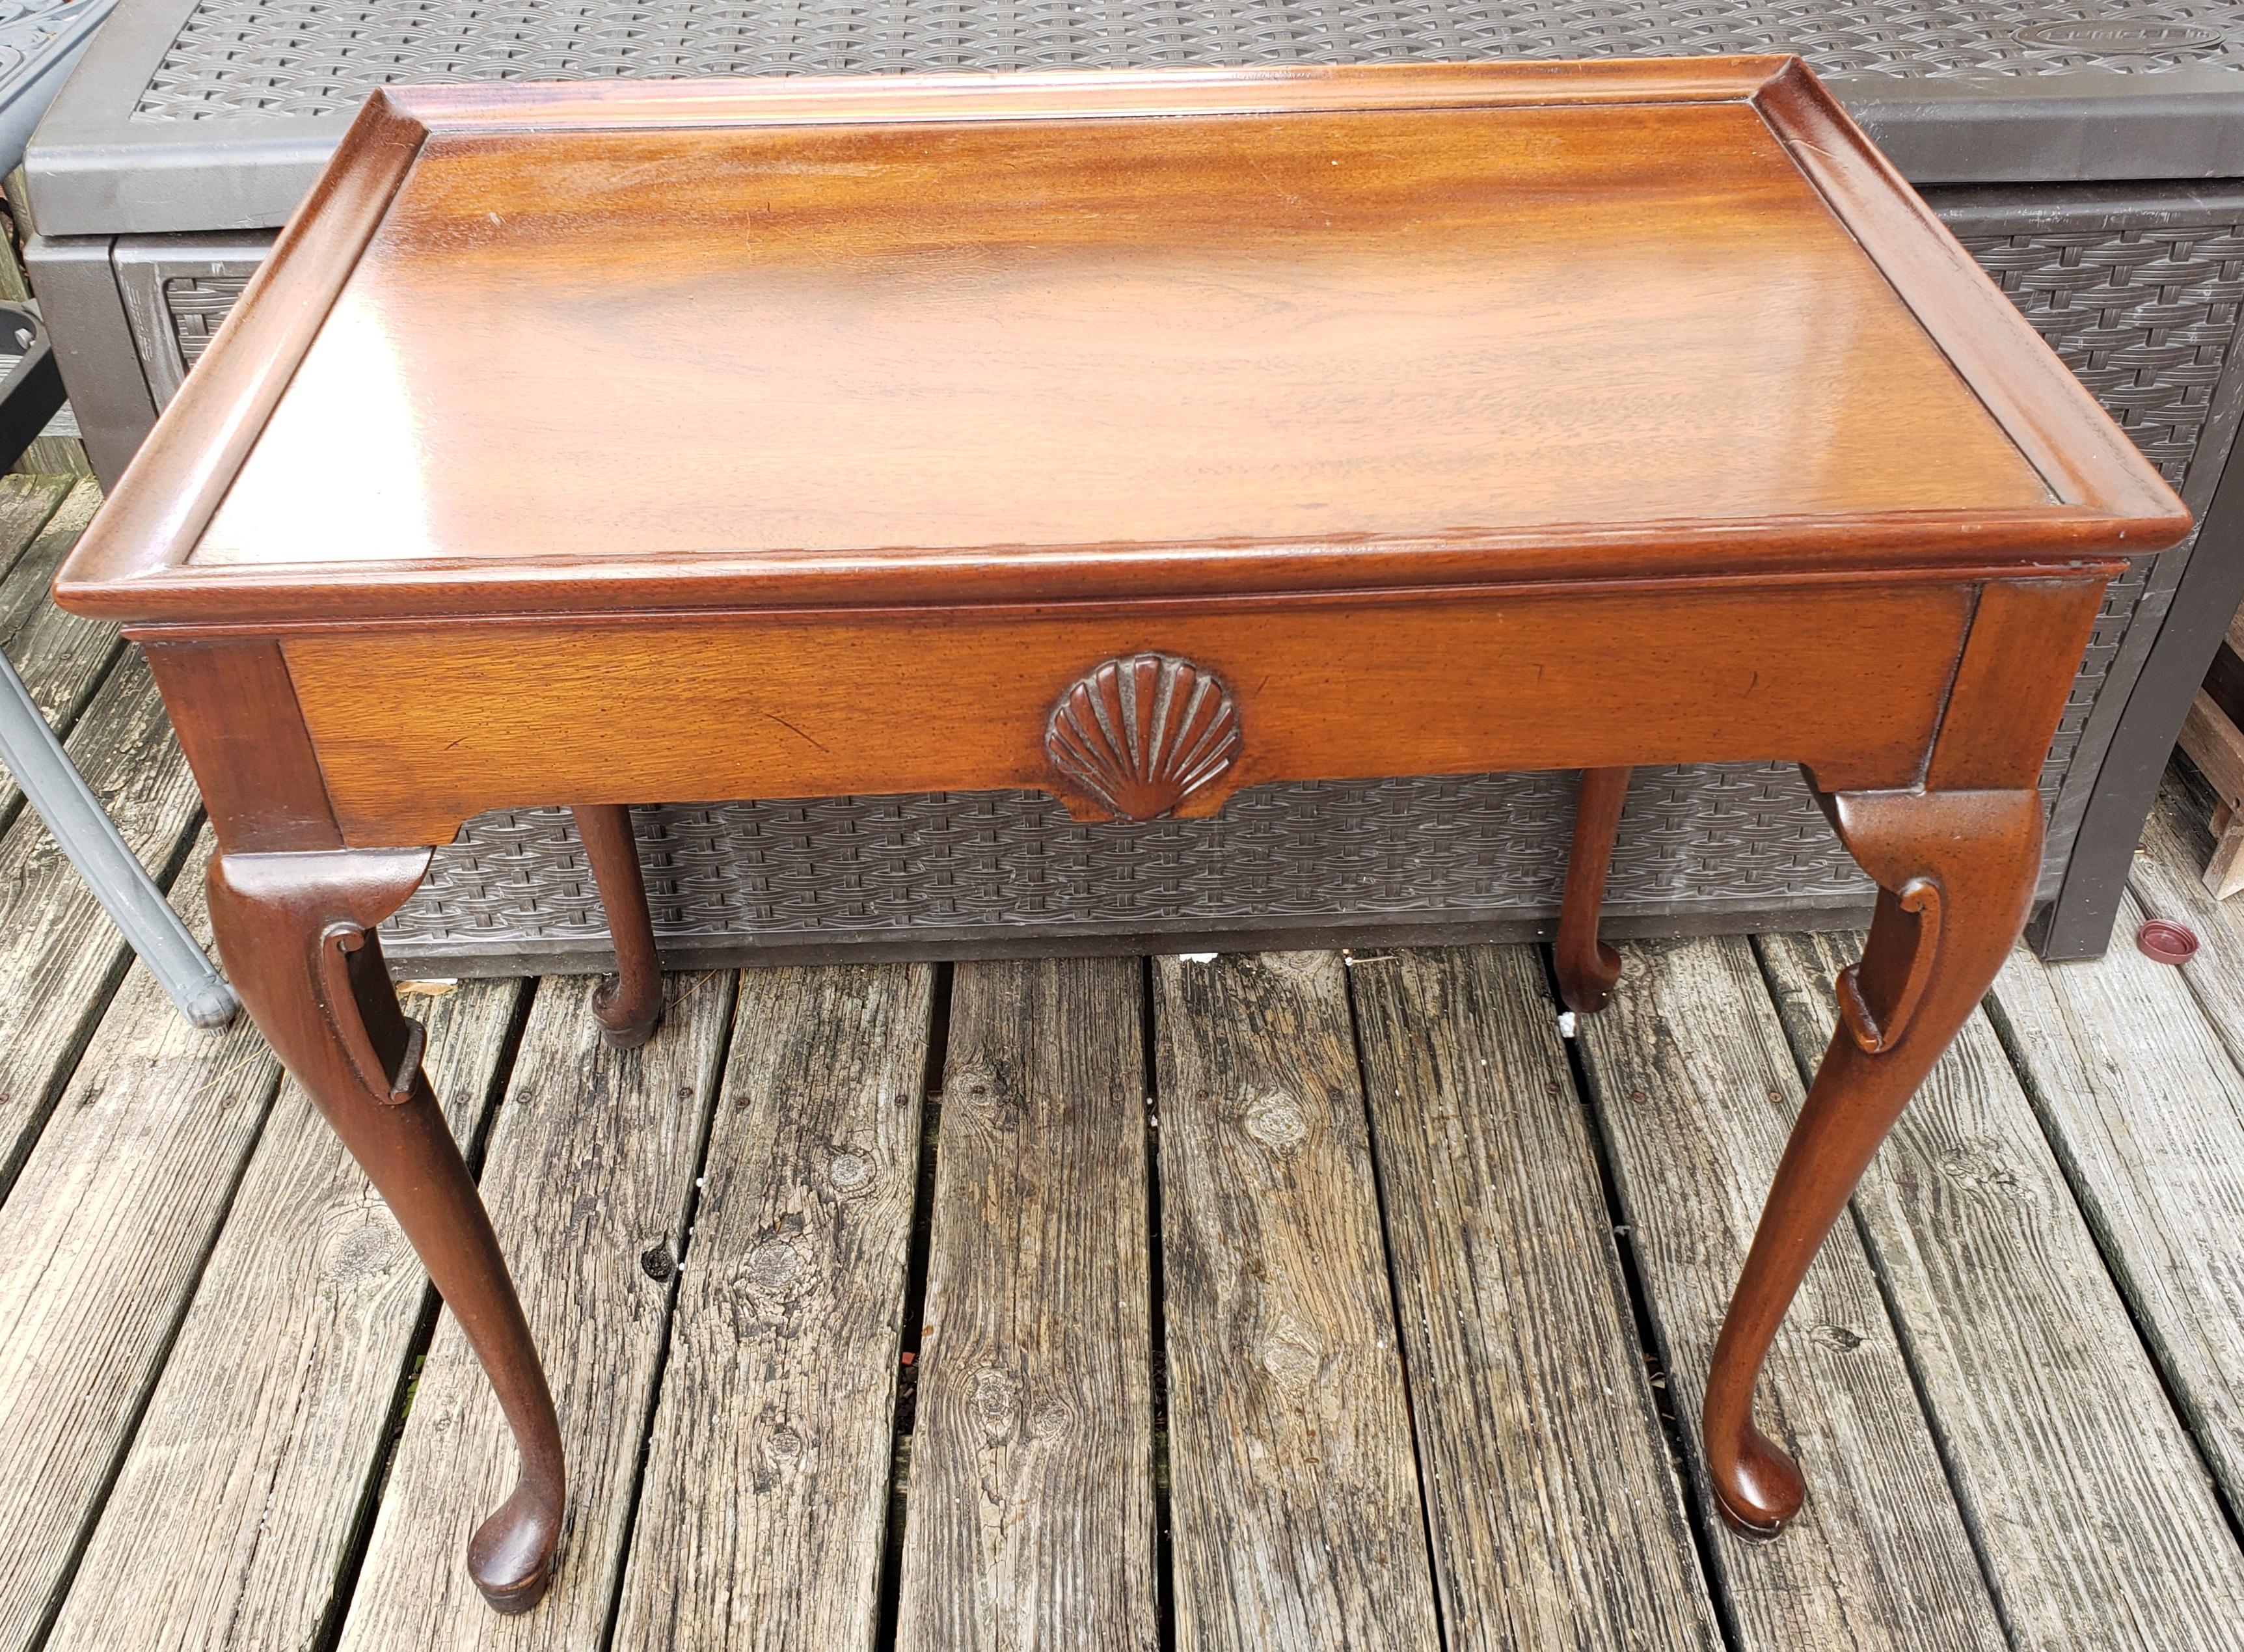 1950s English Mahogany Queen Anne Tray Top Tea Table by Hickory Chair Co. For Sale 3